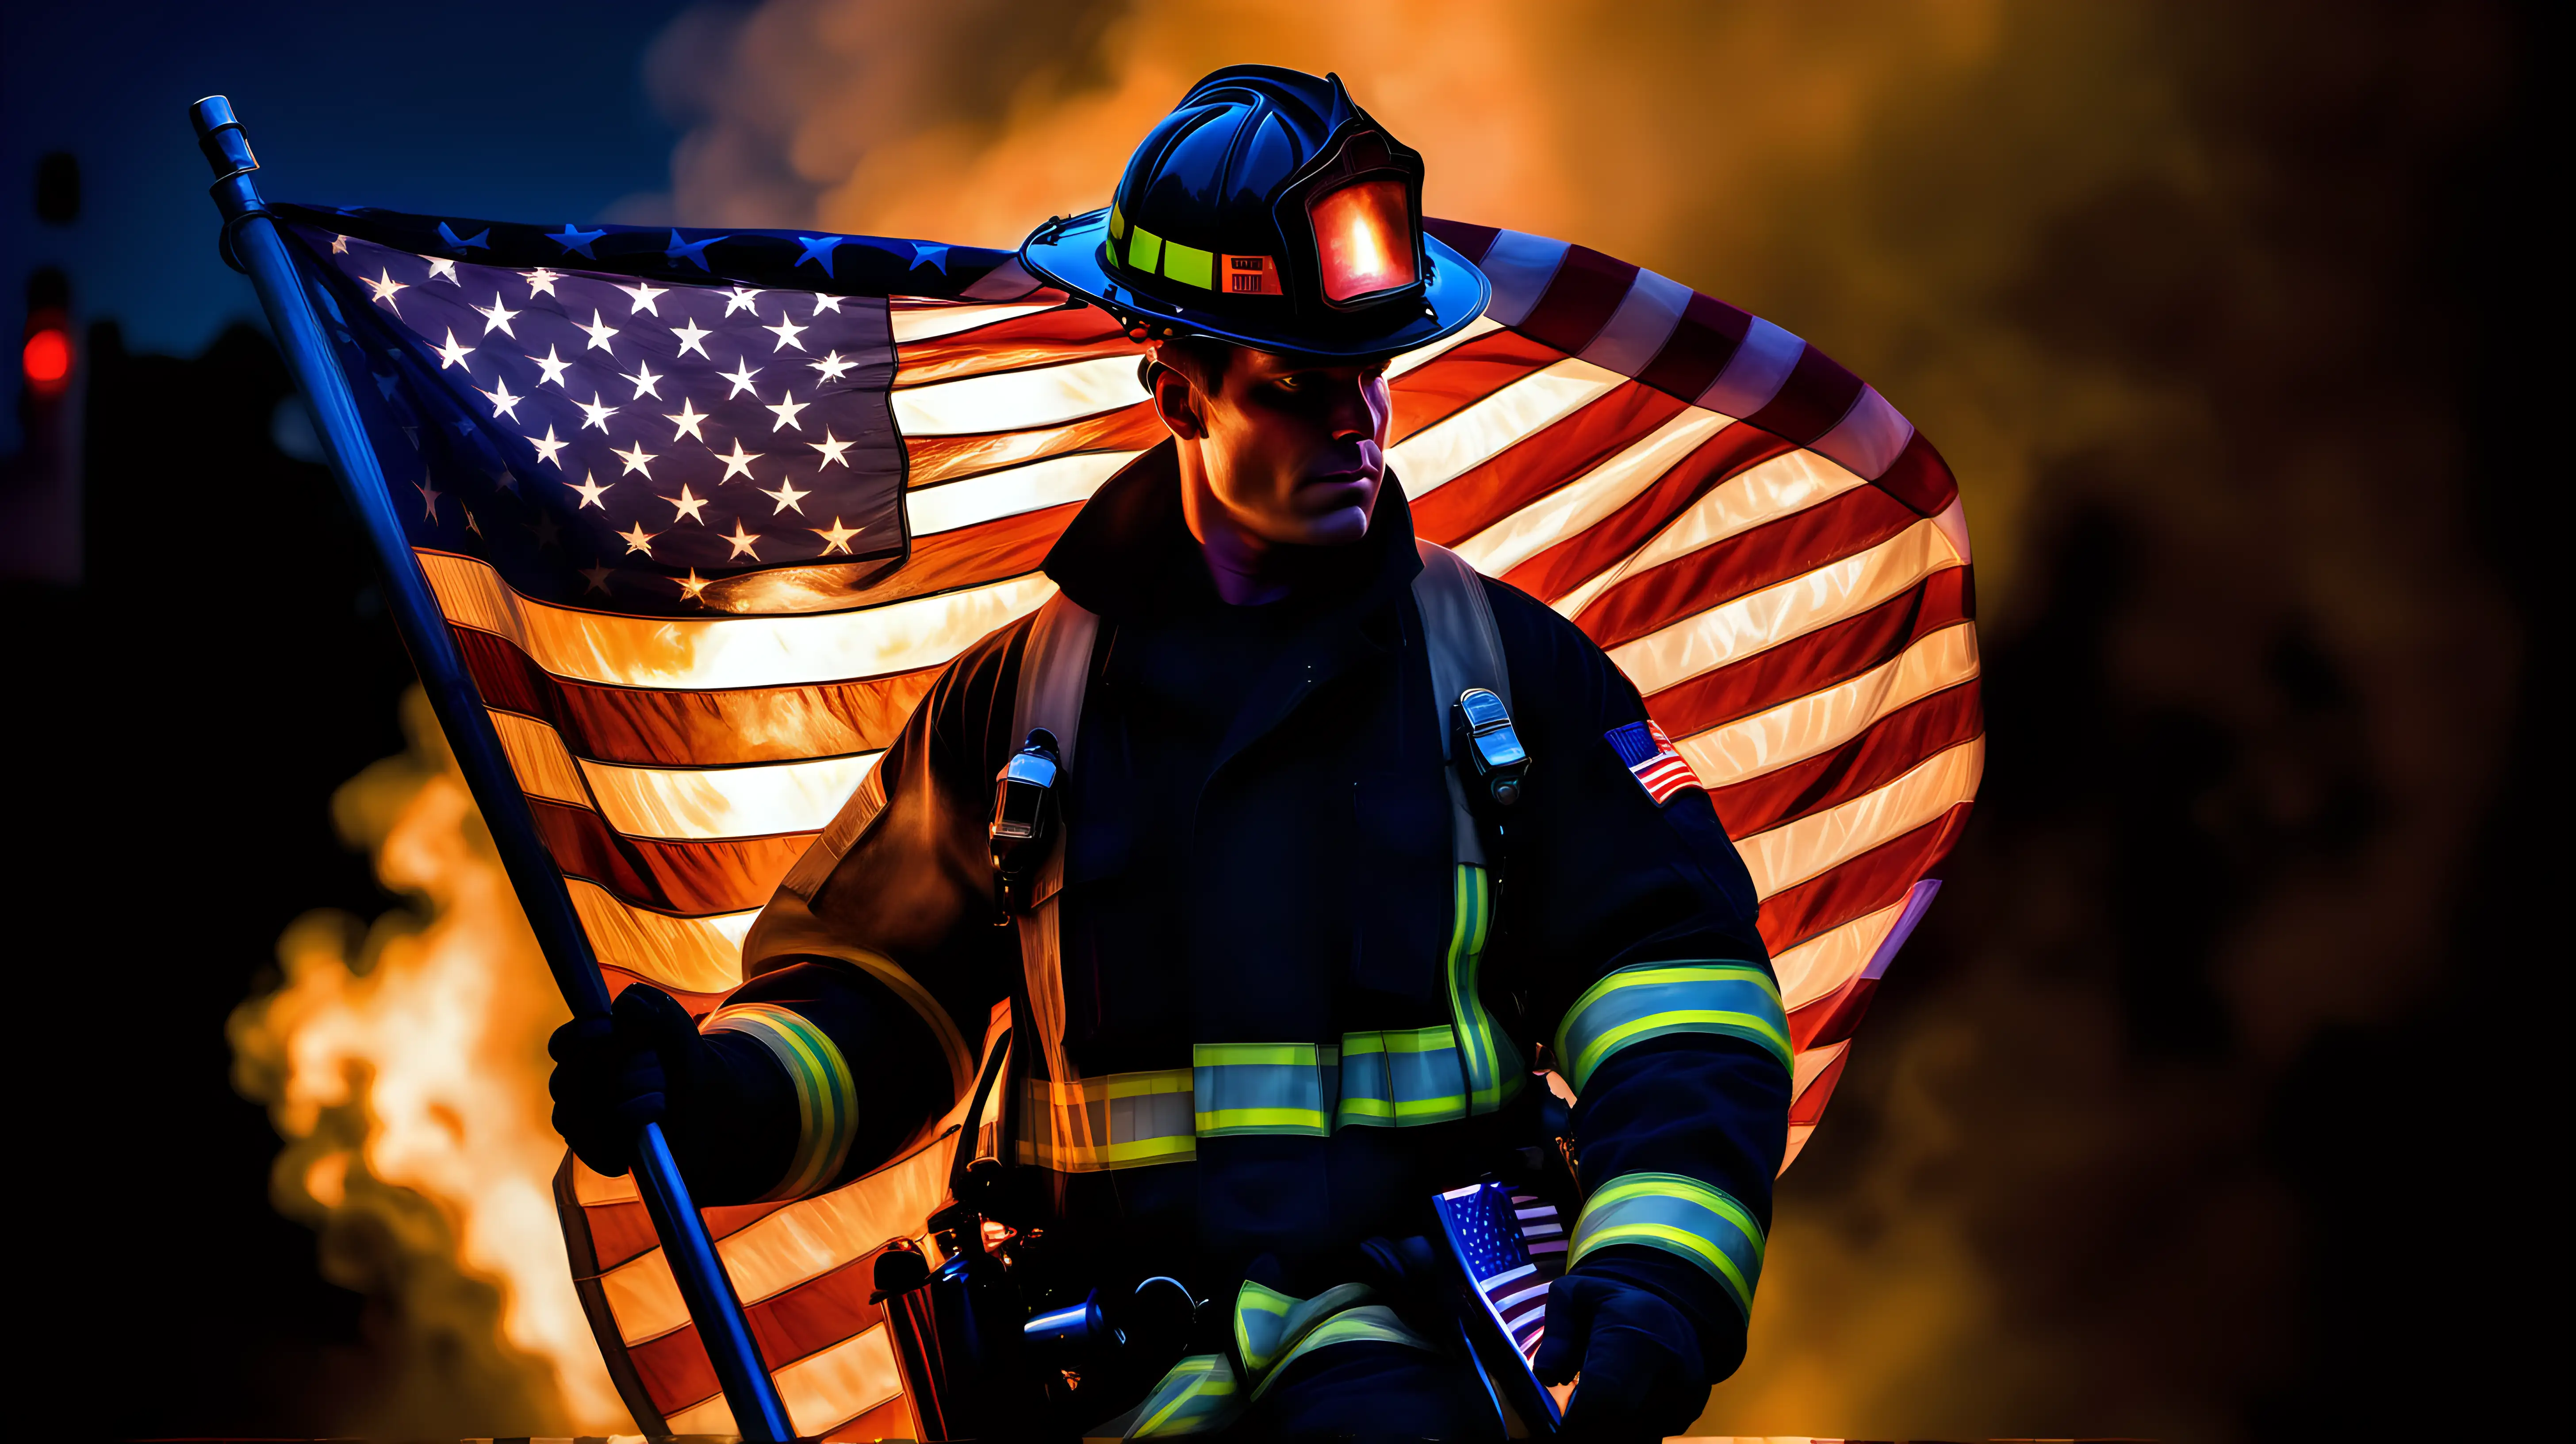 A firefighter cradling a shimmering American flag in their arms, the glow illuminating their determined expression as they bravely serve and protect their community with unwavering patriotism.